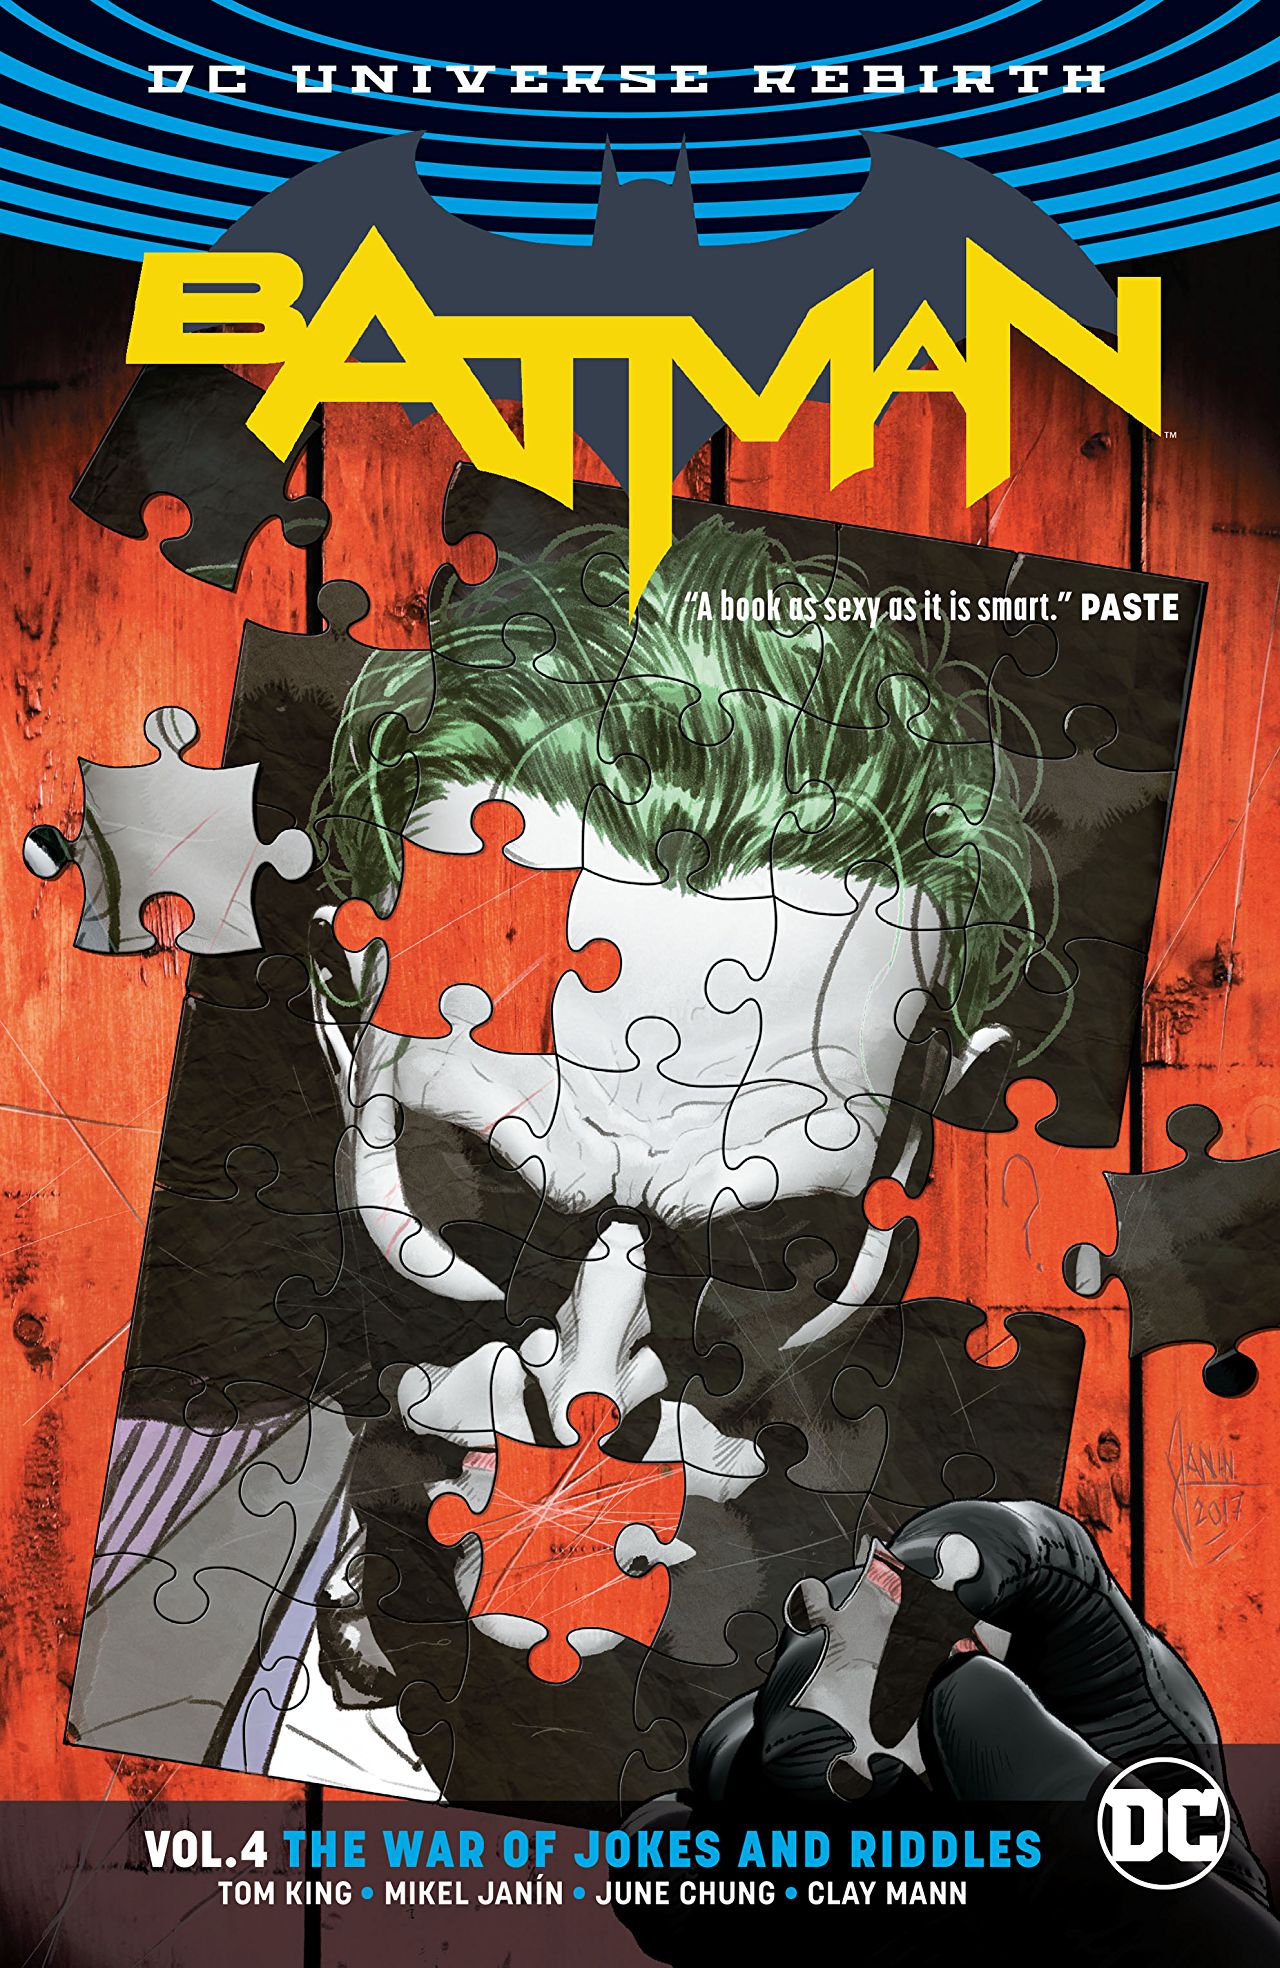 'Batman Vol. 4: The War of Jokes and Riddles' uses Batman's treasure trove of rogues to the fullest